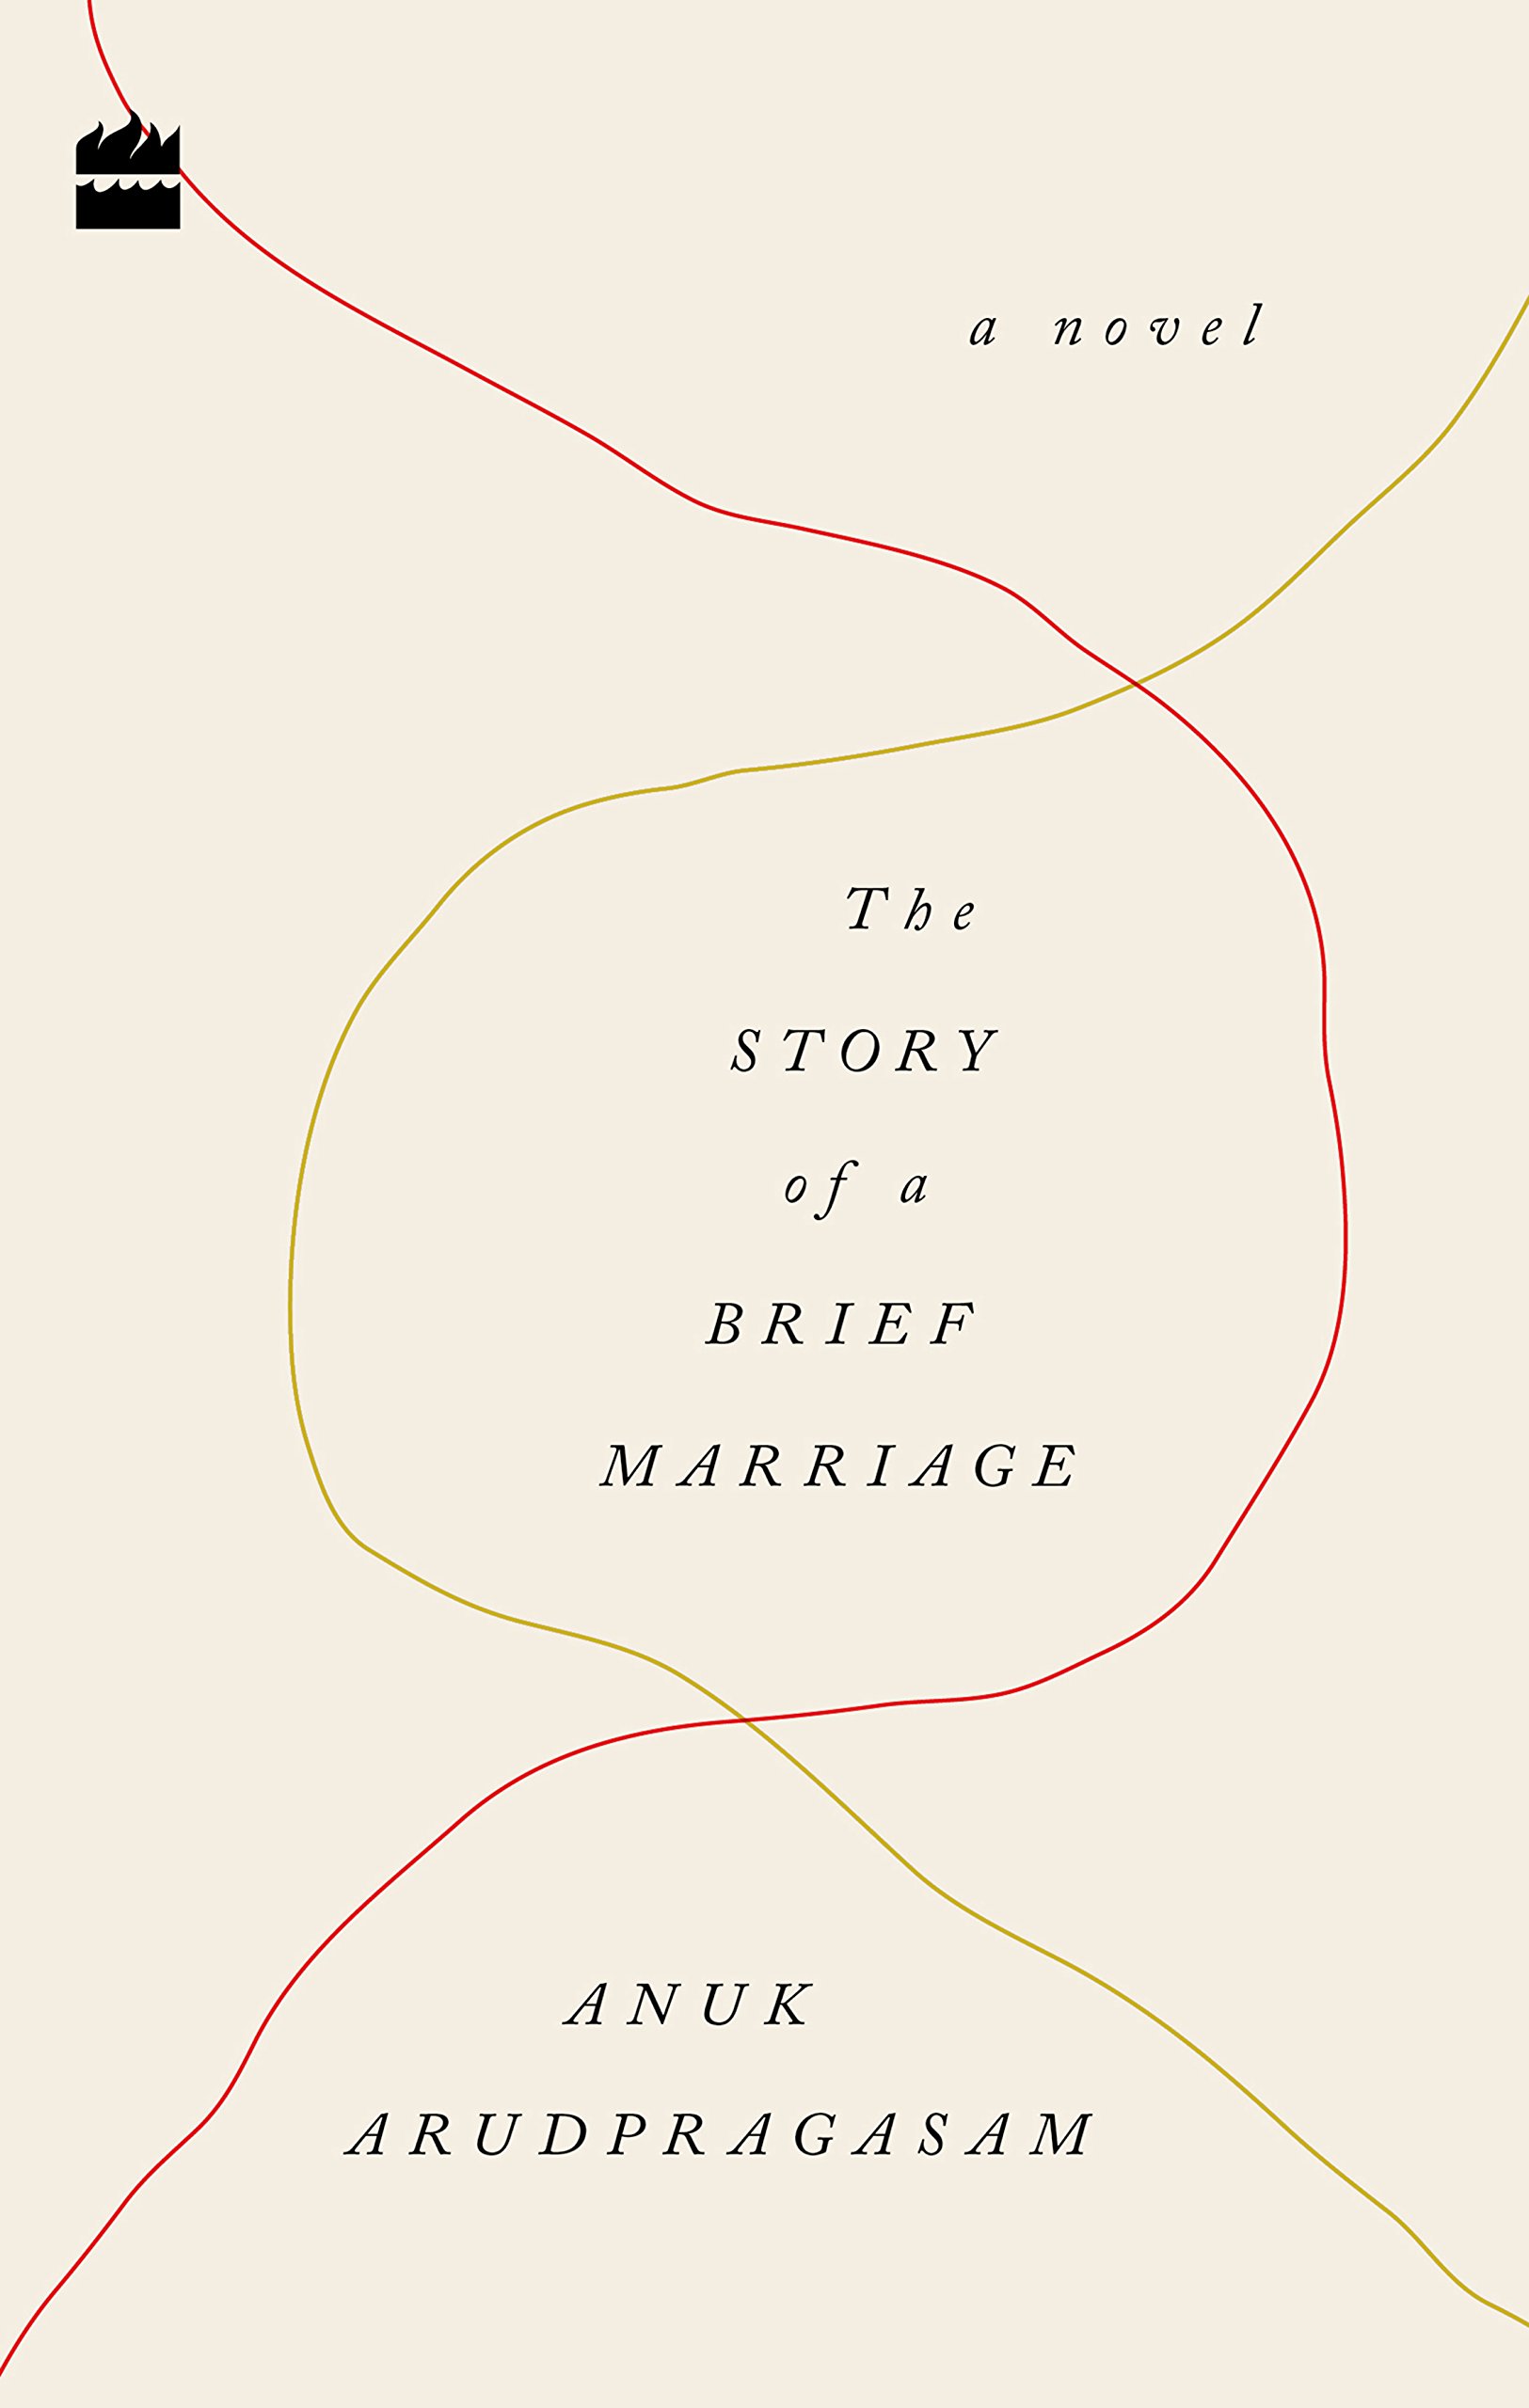 the story of a brief marriage by anuk arudpragasam